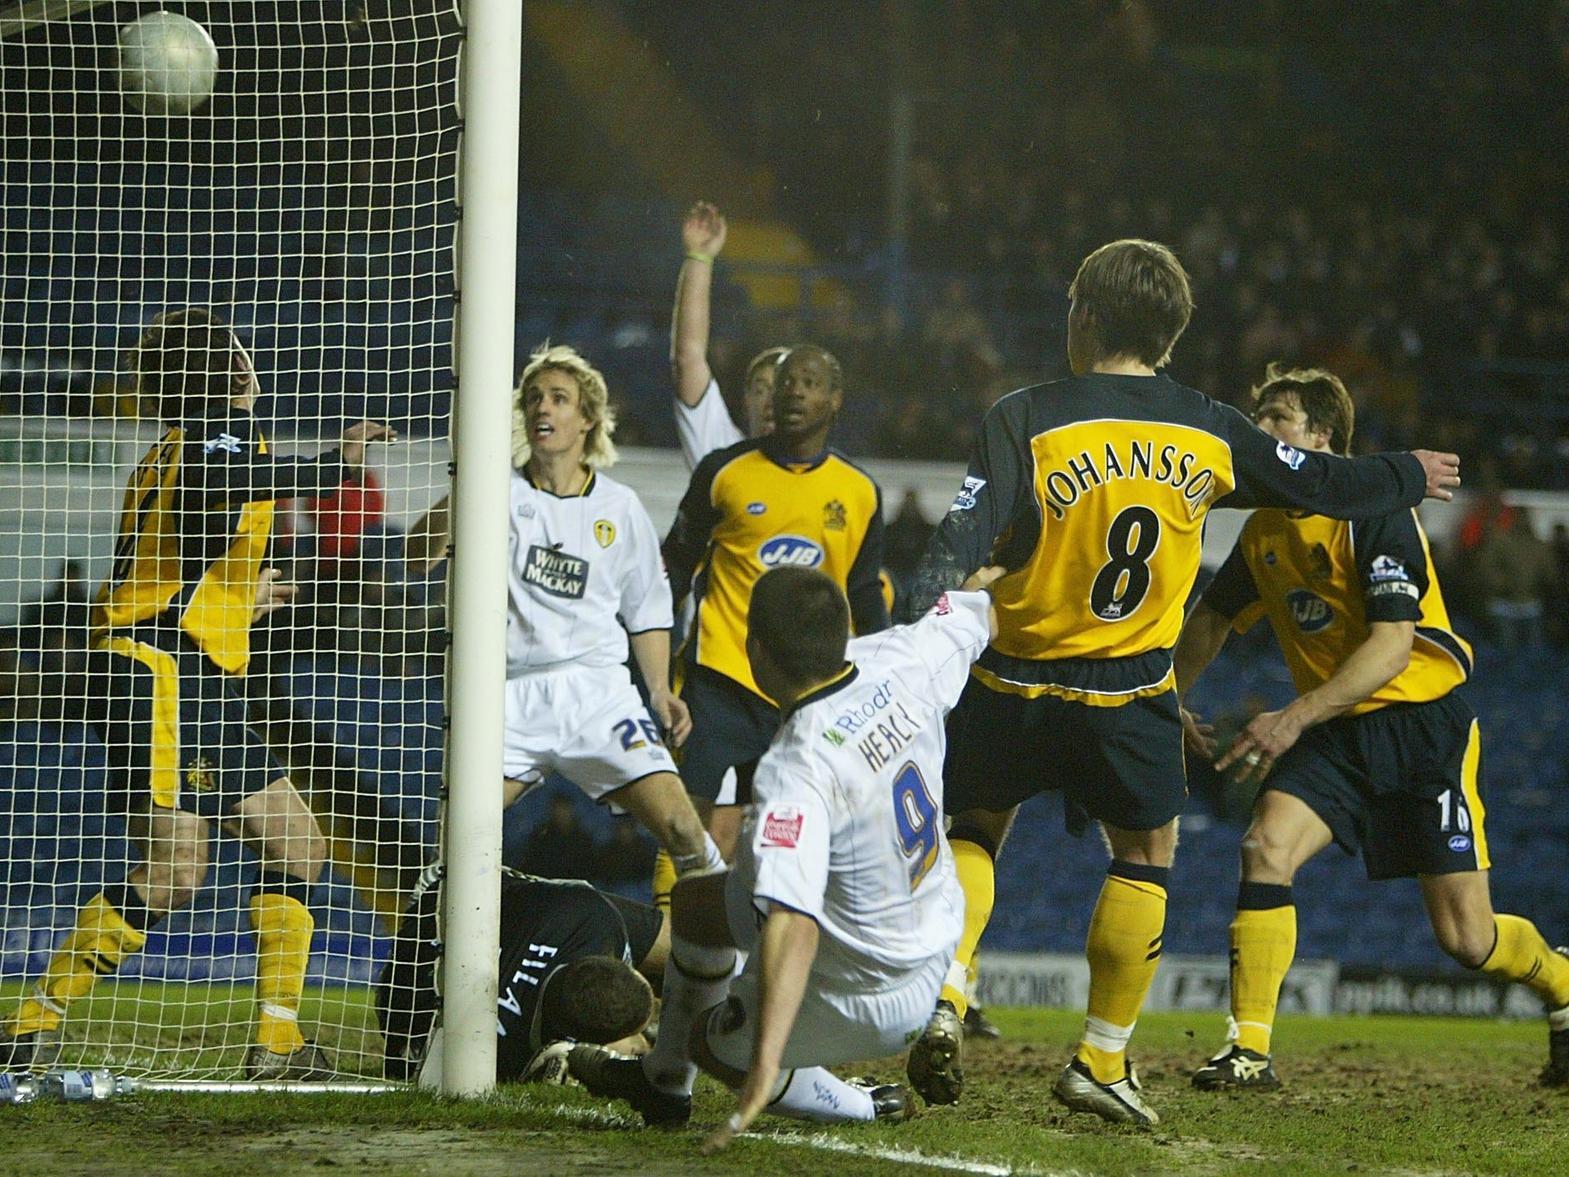 David Healy, who had scored a penalty in normal time, missed for Leeds, as did Rob Hulse with their fourth kick.